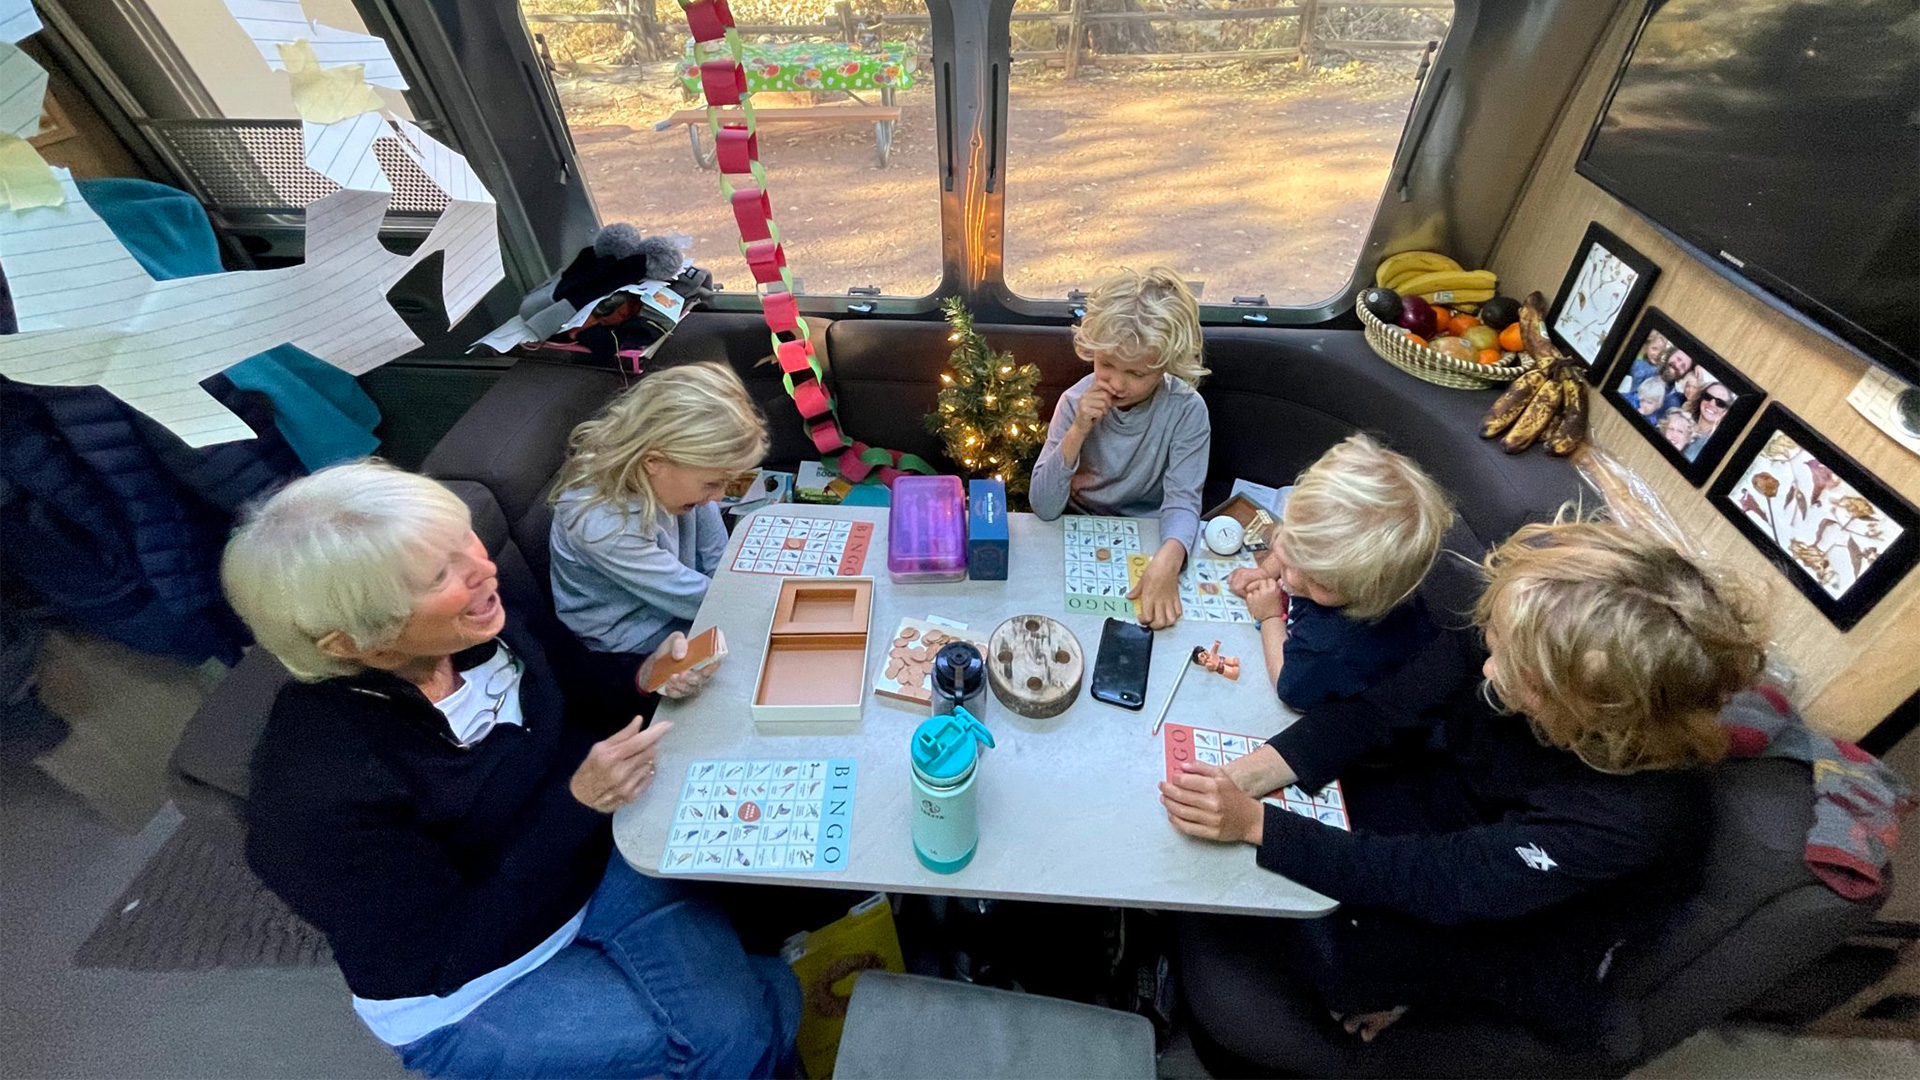 Four kids and their grandma playing Bingo and games in their Airstream travel trailer while they camp.